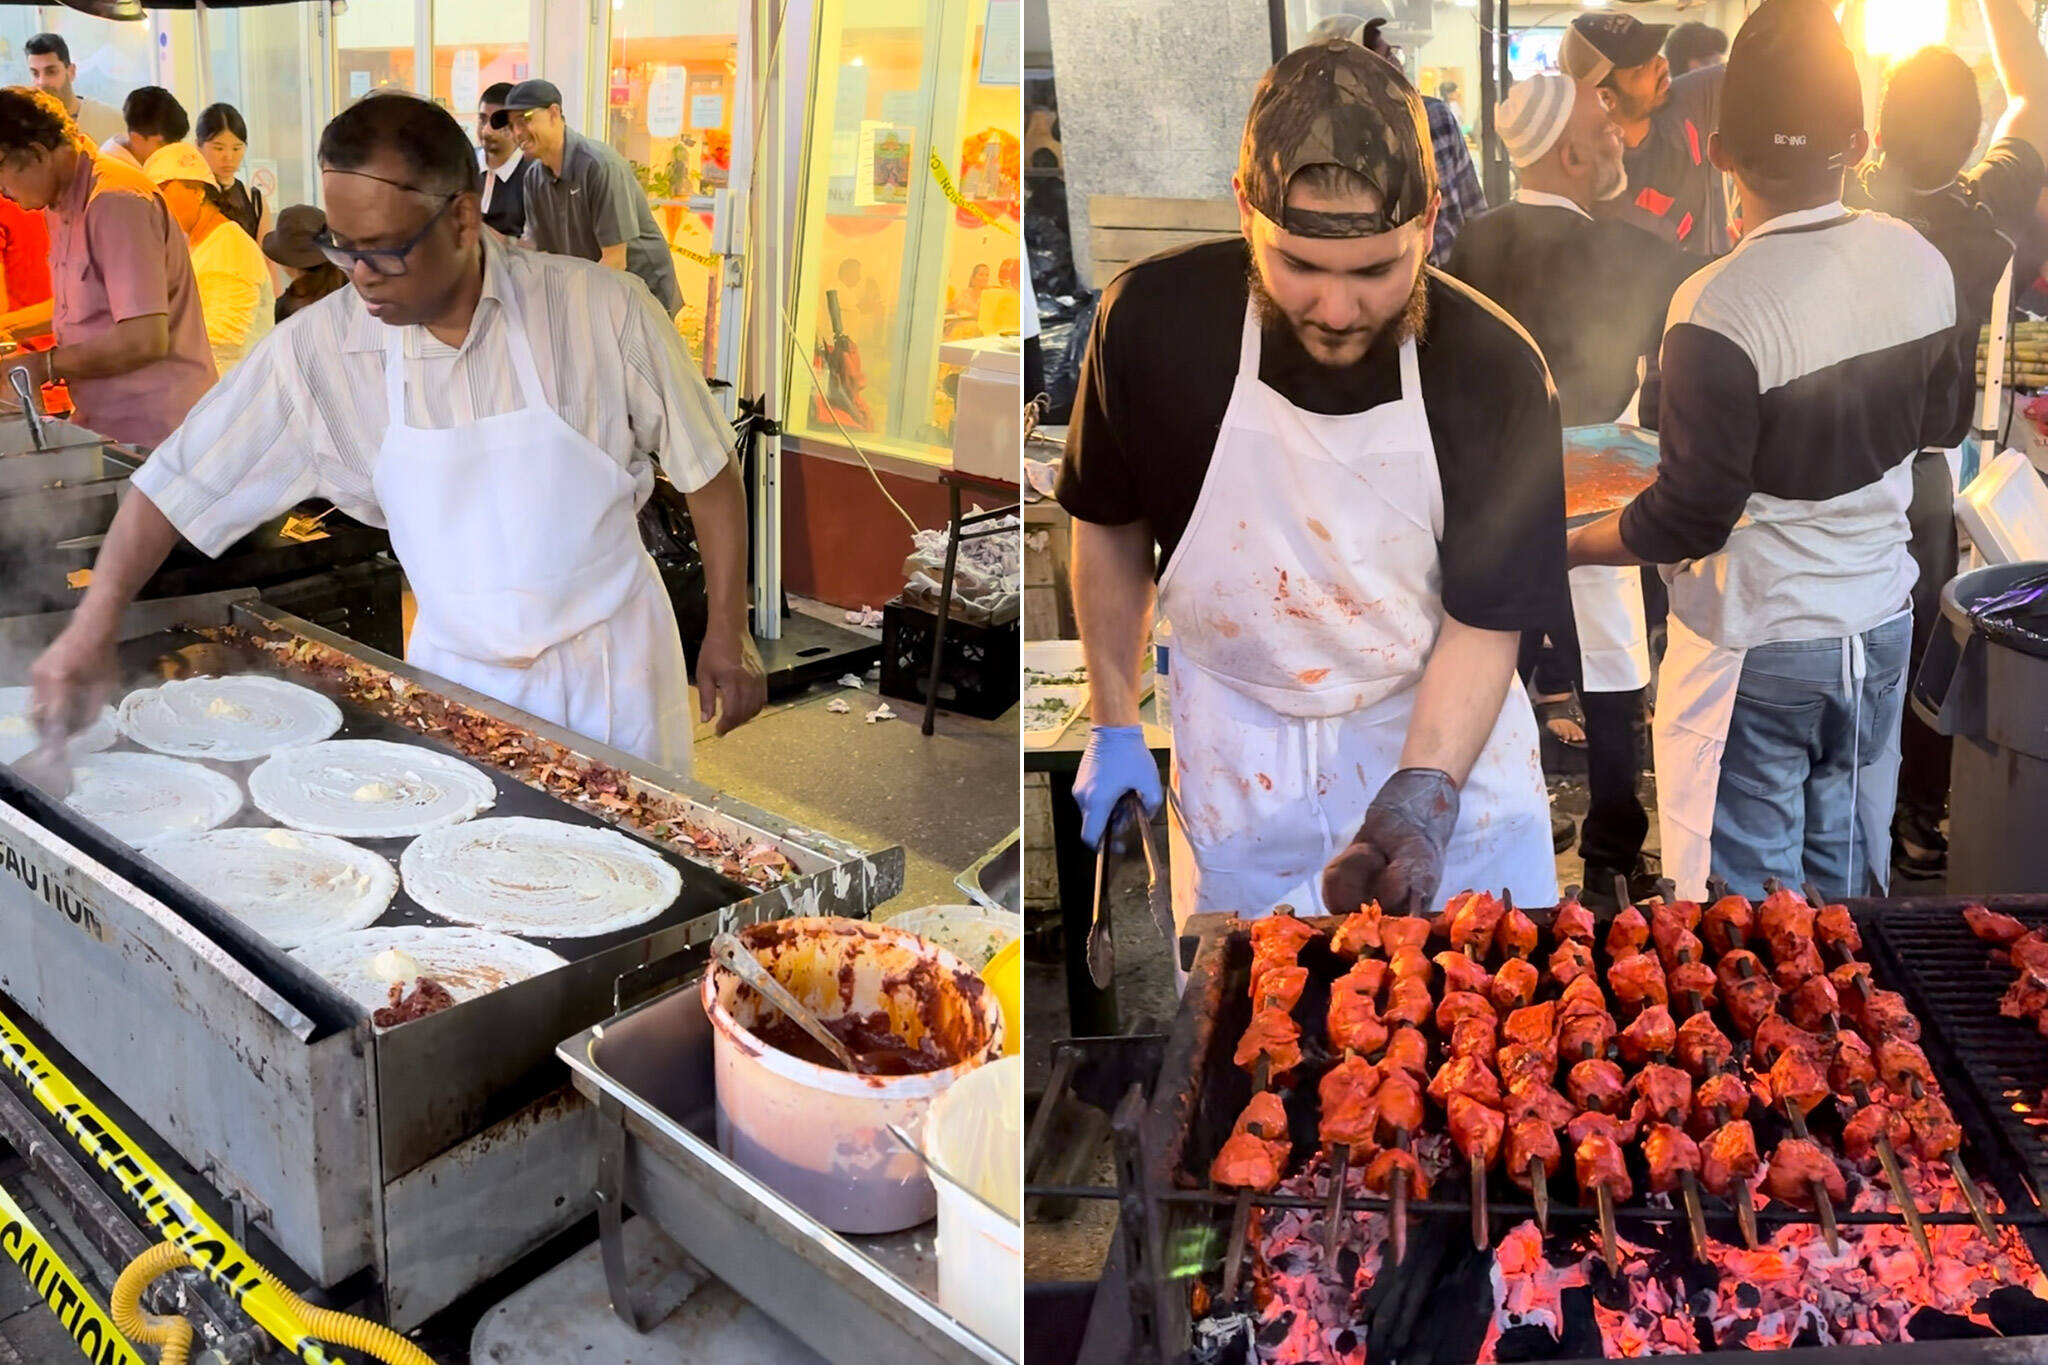 There's a two-day Indian street food festival in Toronto this summer